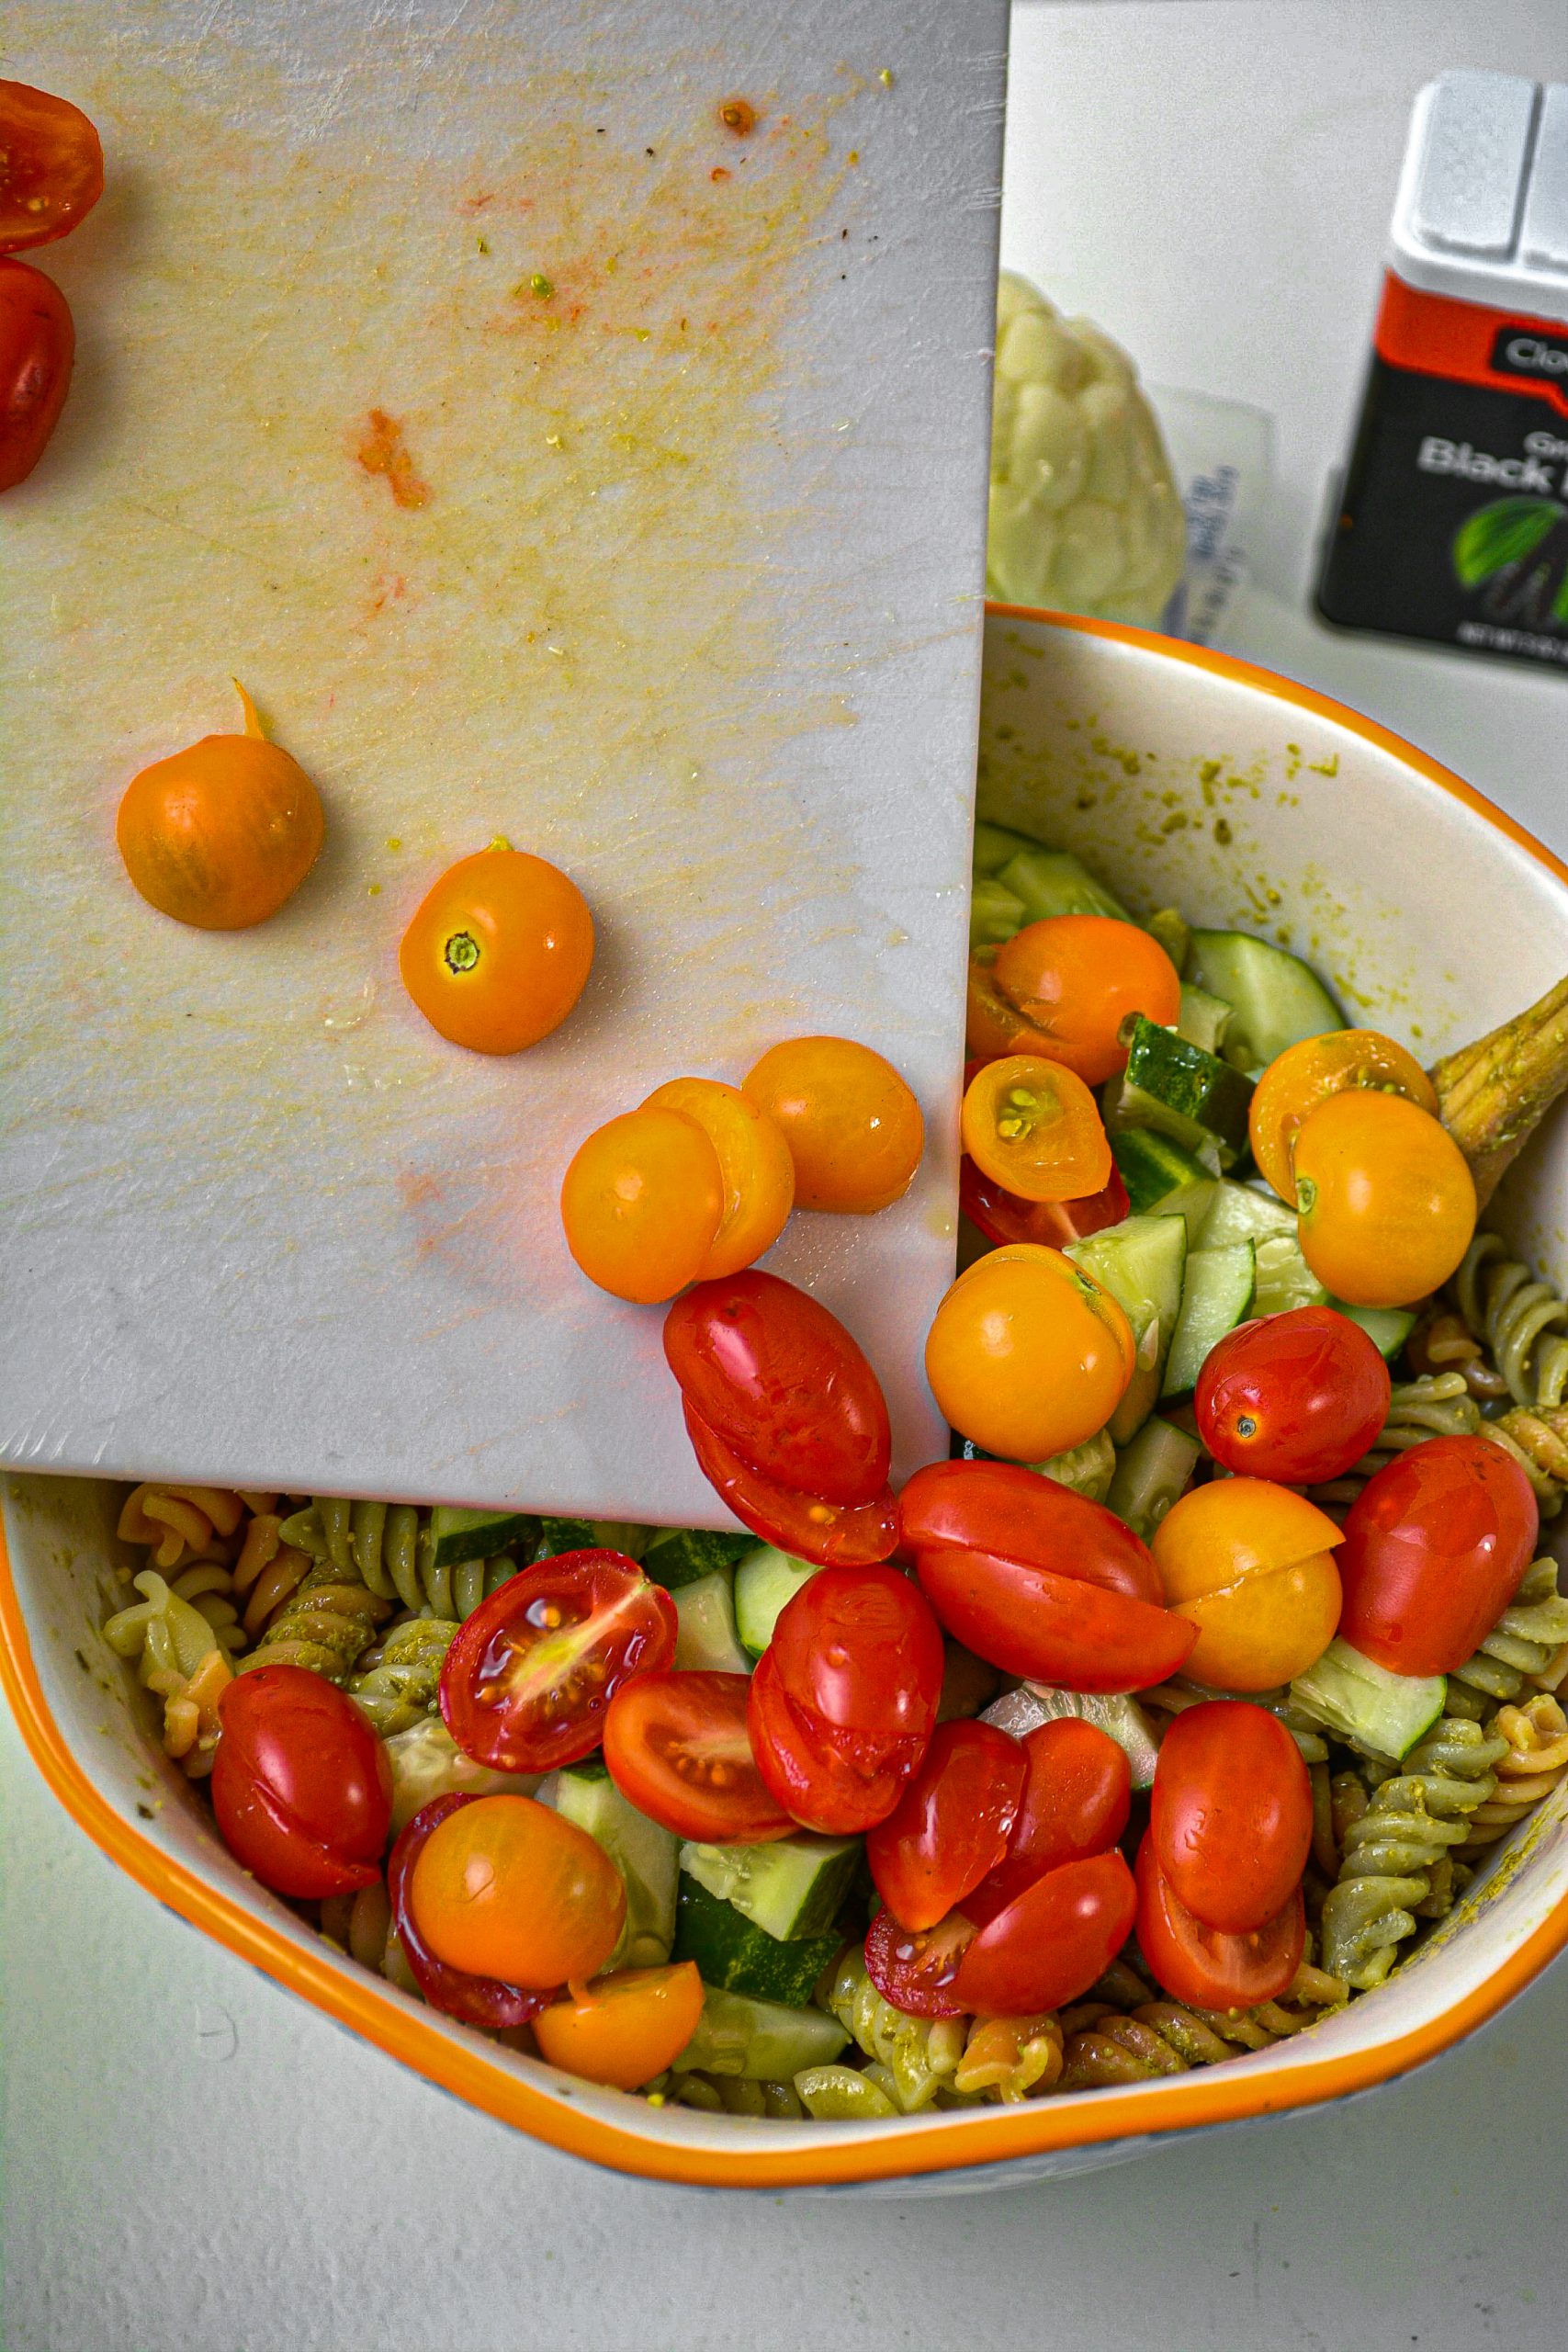 Place 2 cups of cherry tomatoes sliced in half into the pasta, and mix well.